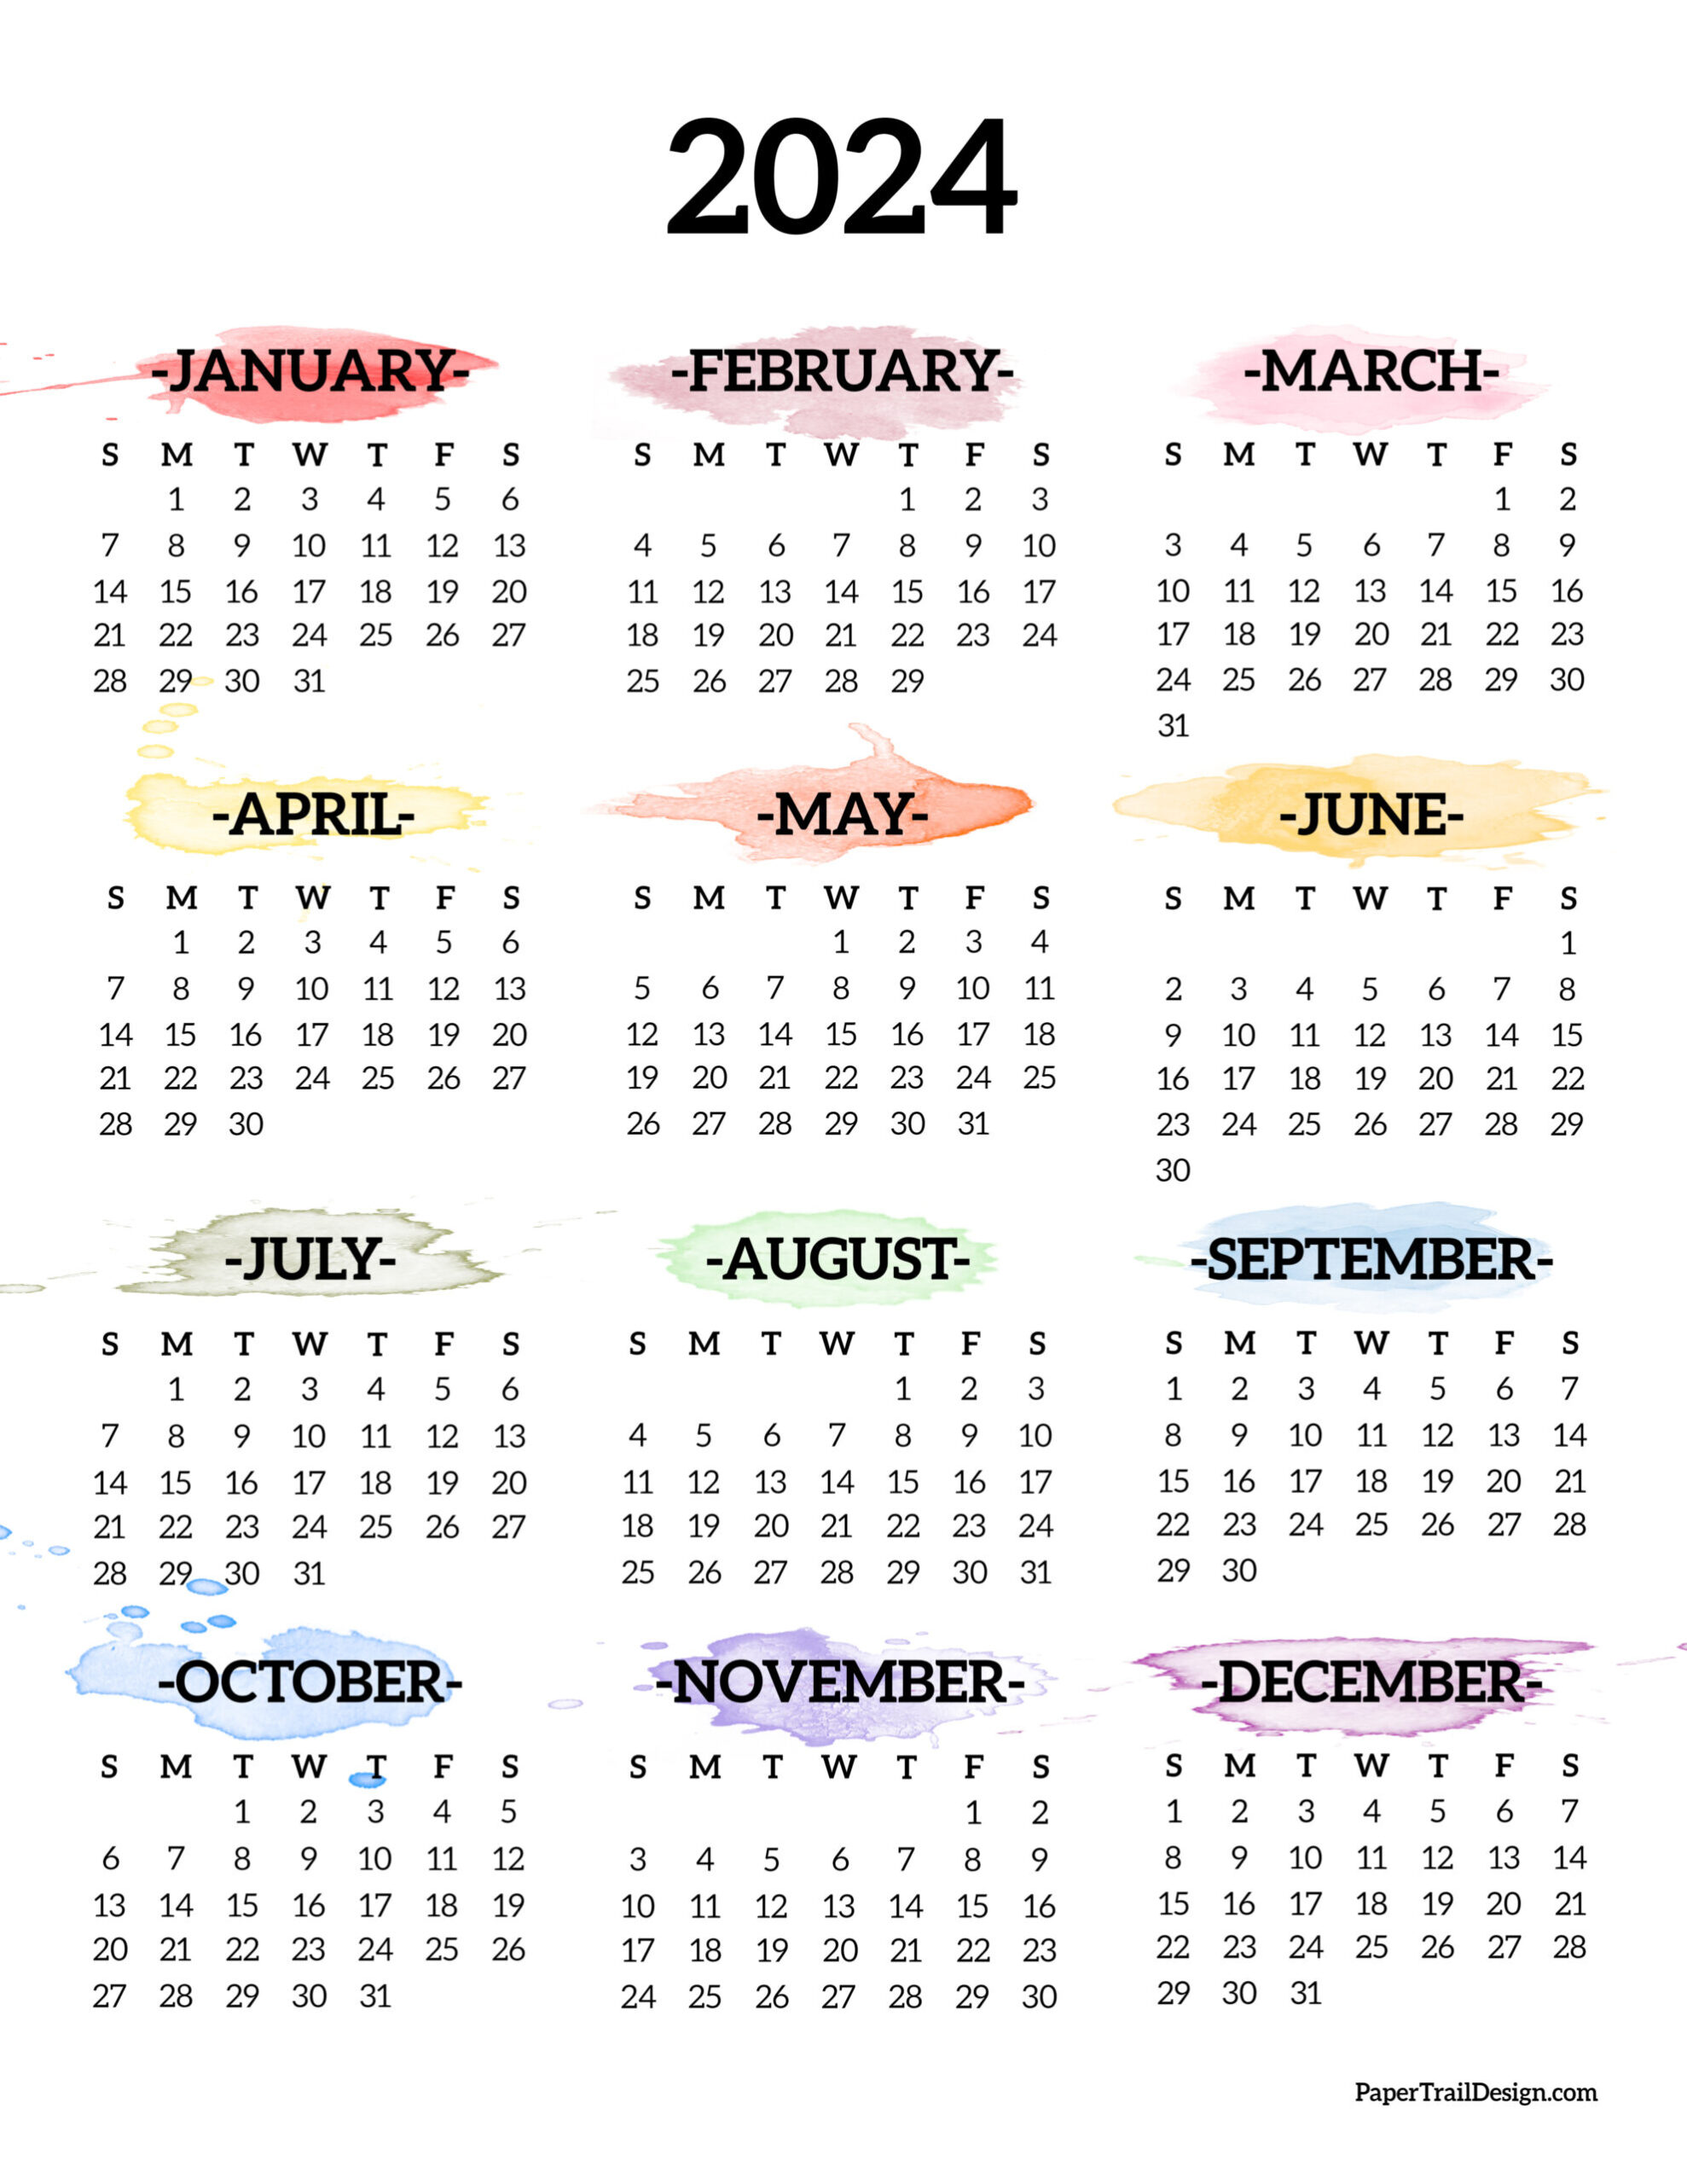 Calendar 2024 Printable One Page - Paper Trail Design | Year At A Glance Calendar 2024 Printable